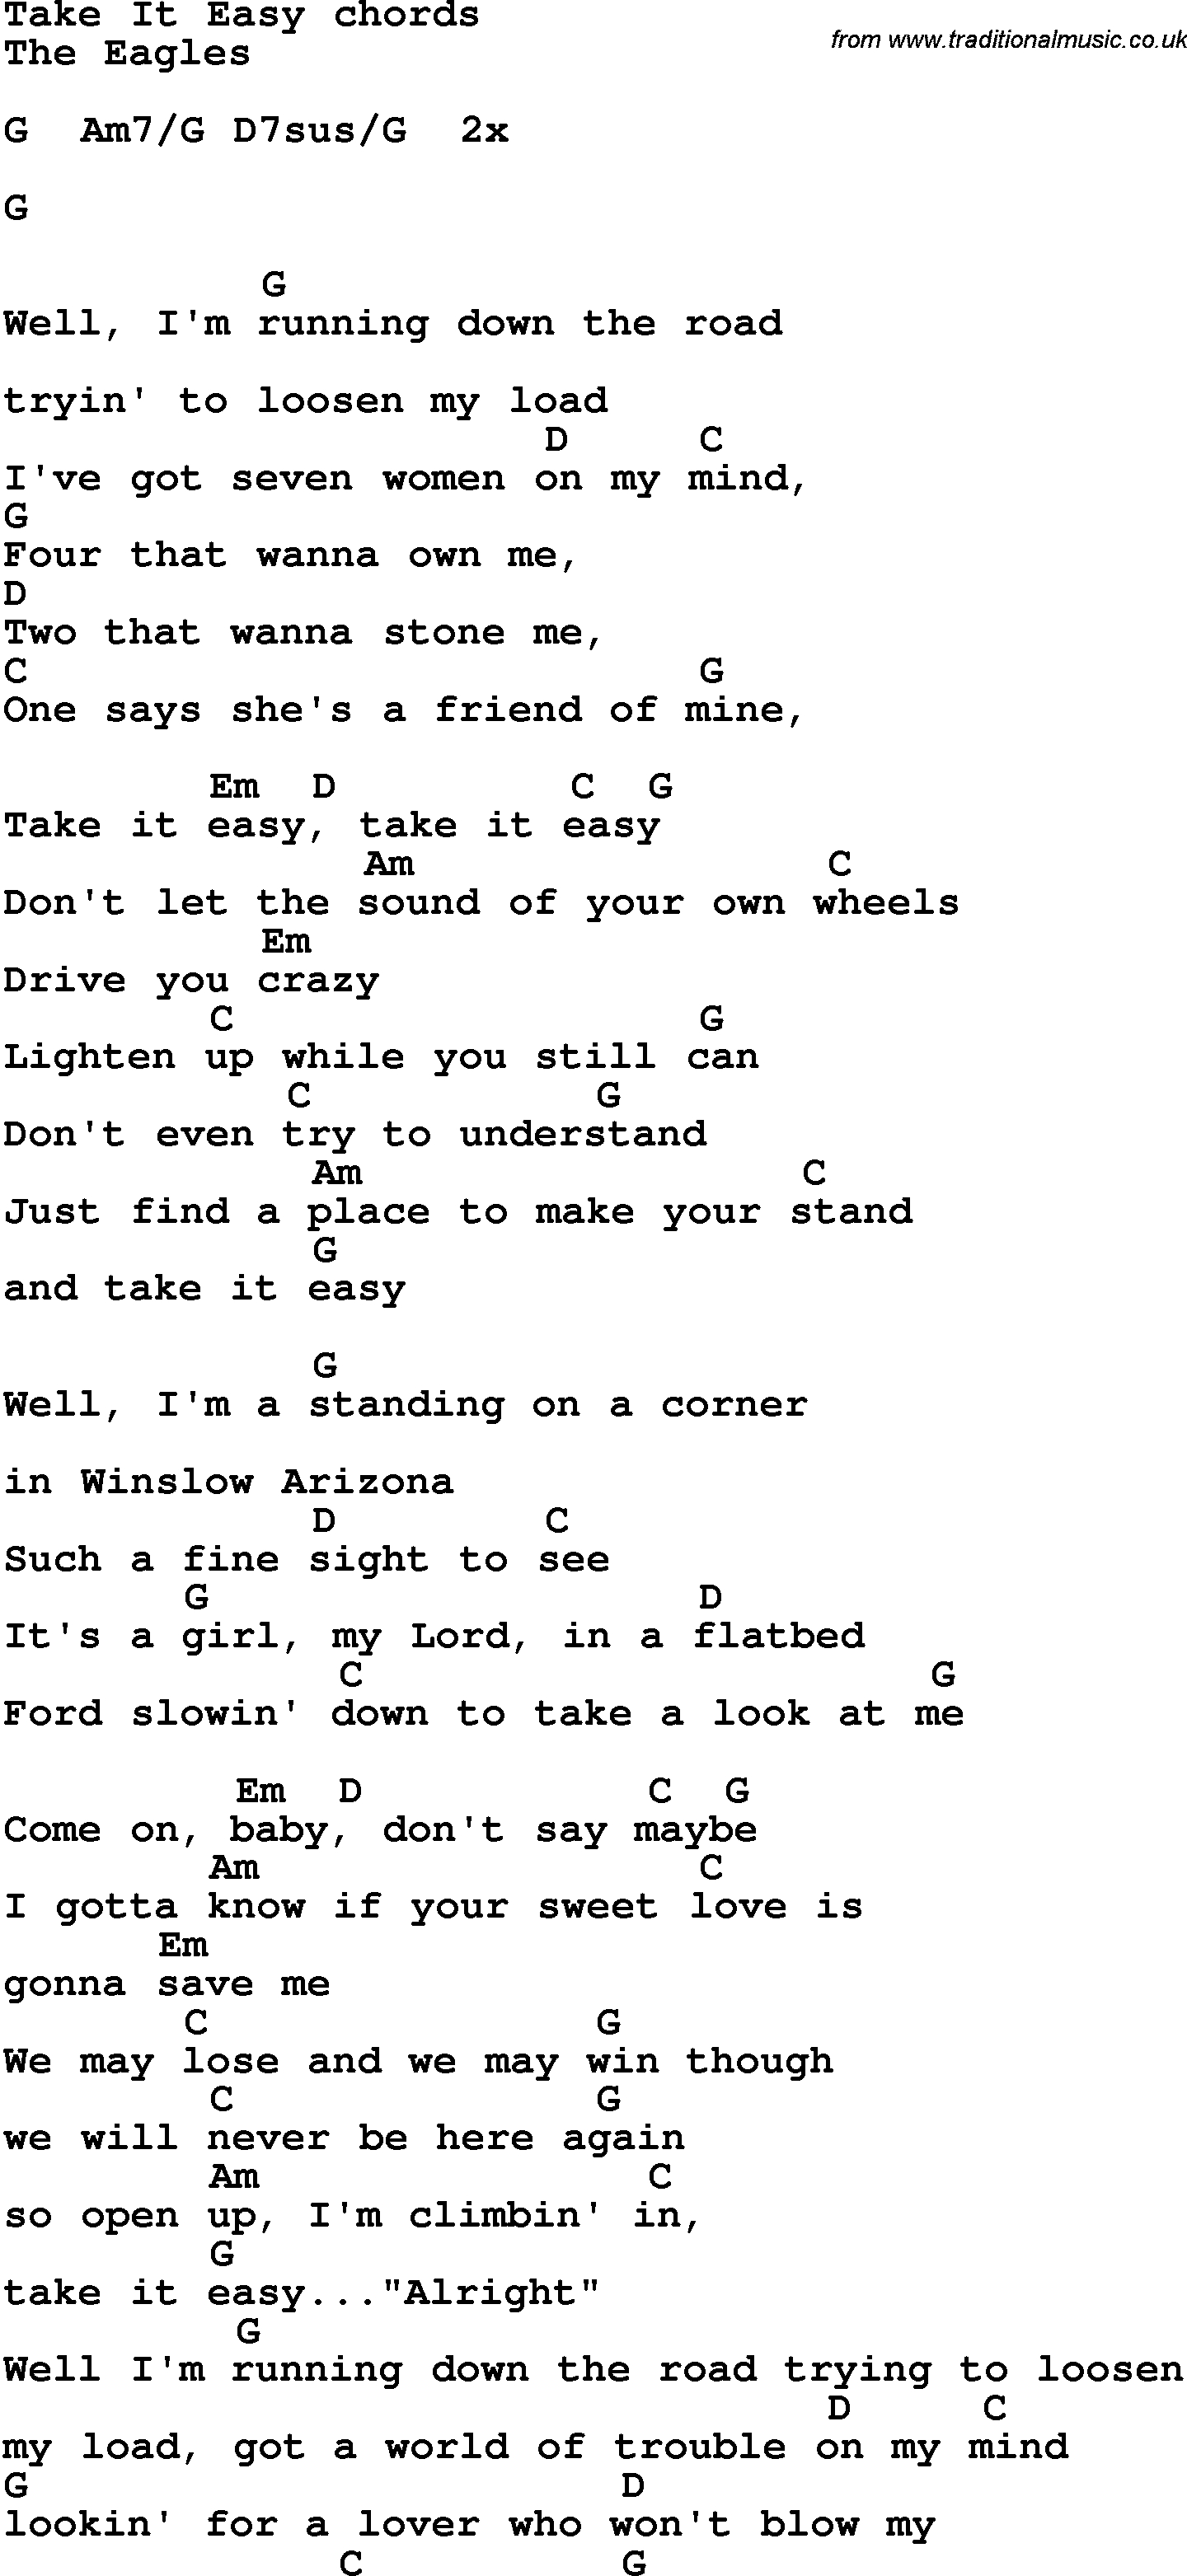 Hotel California Chords Song Lyrics With Guitar Chords For Take It Easy The Eagles